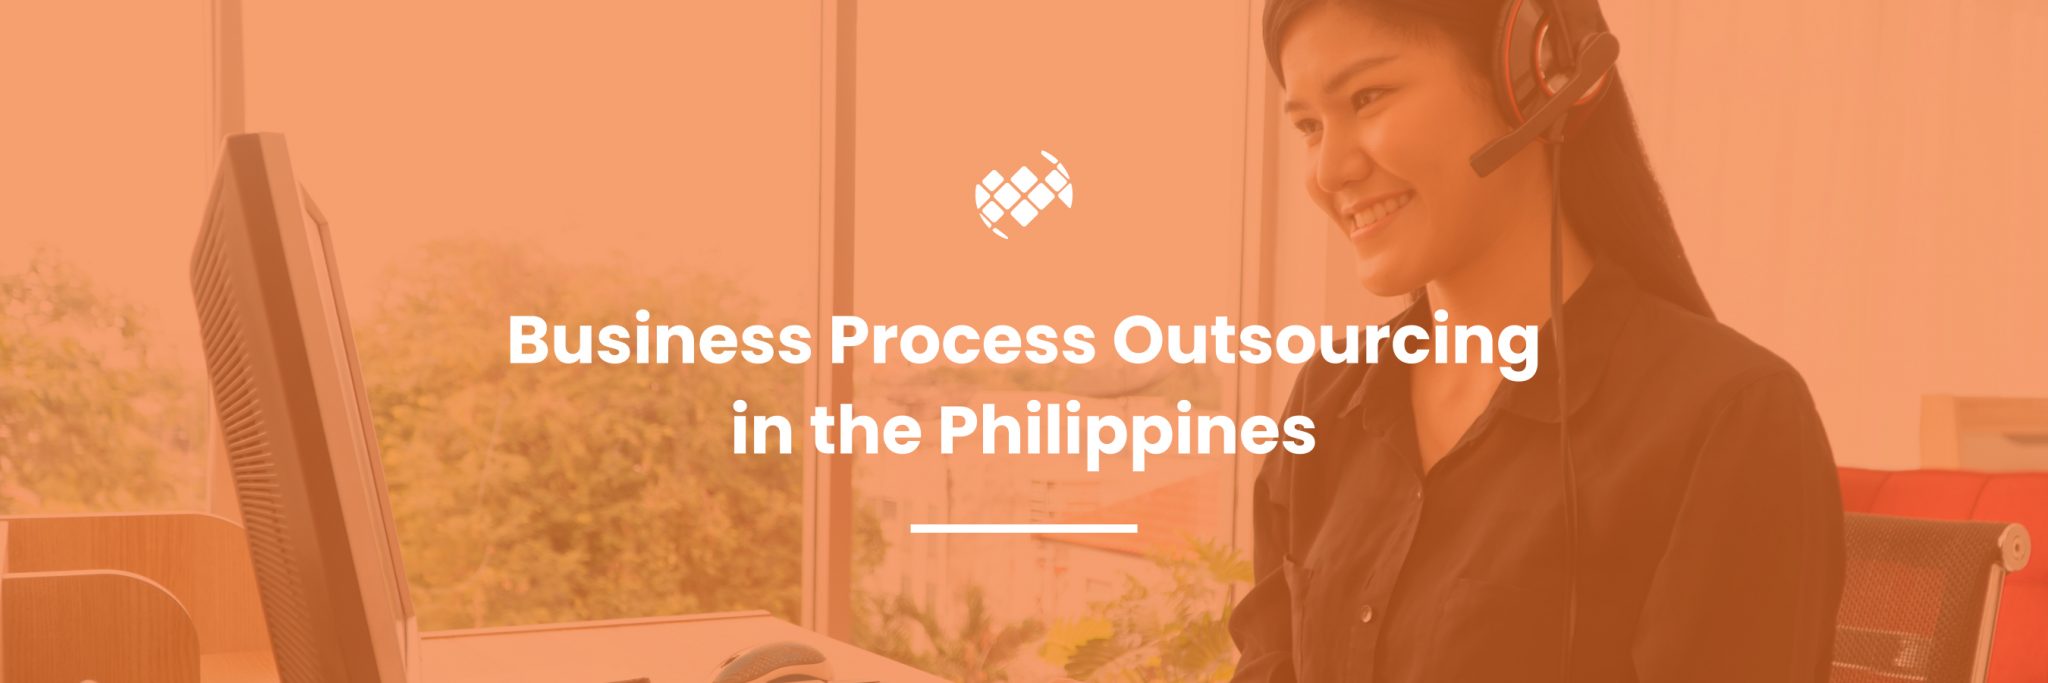 Bpo Philippines Business Process Outsourcing Philippines Sourcefit